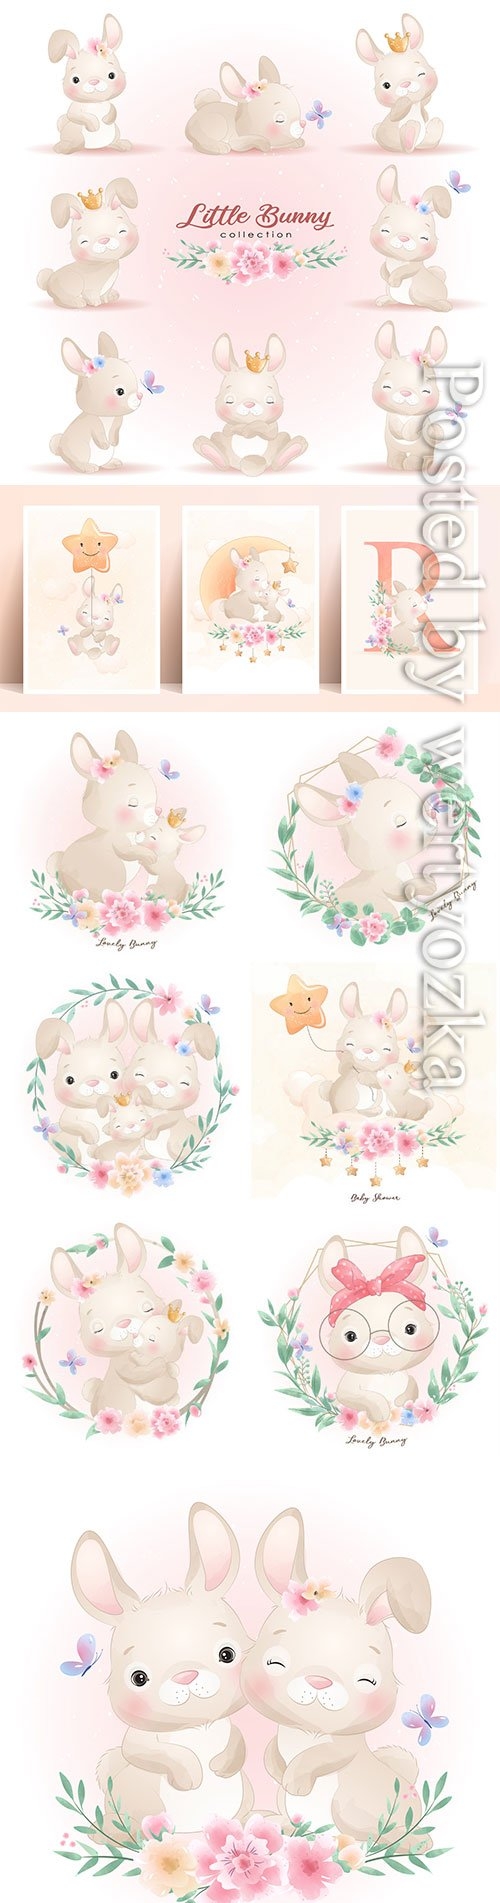 Cute doodle bunny poses with floral illustration premium vector